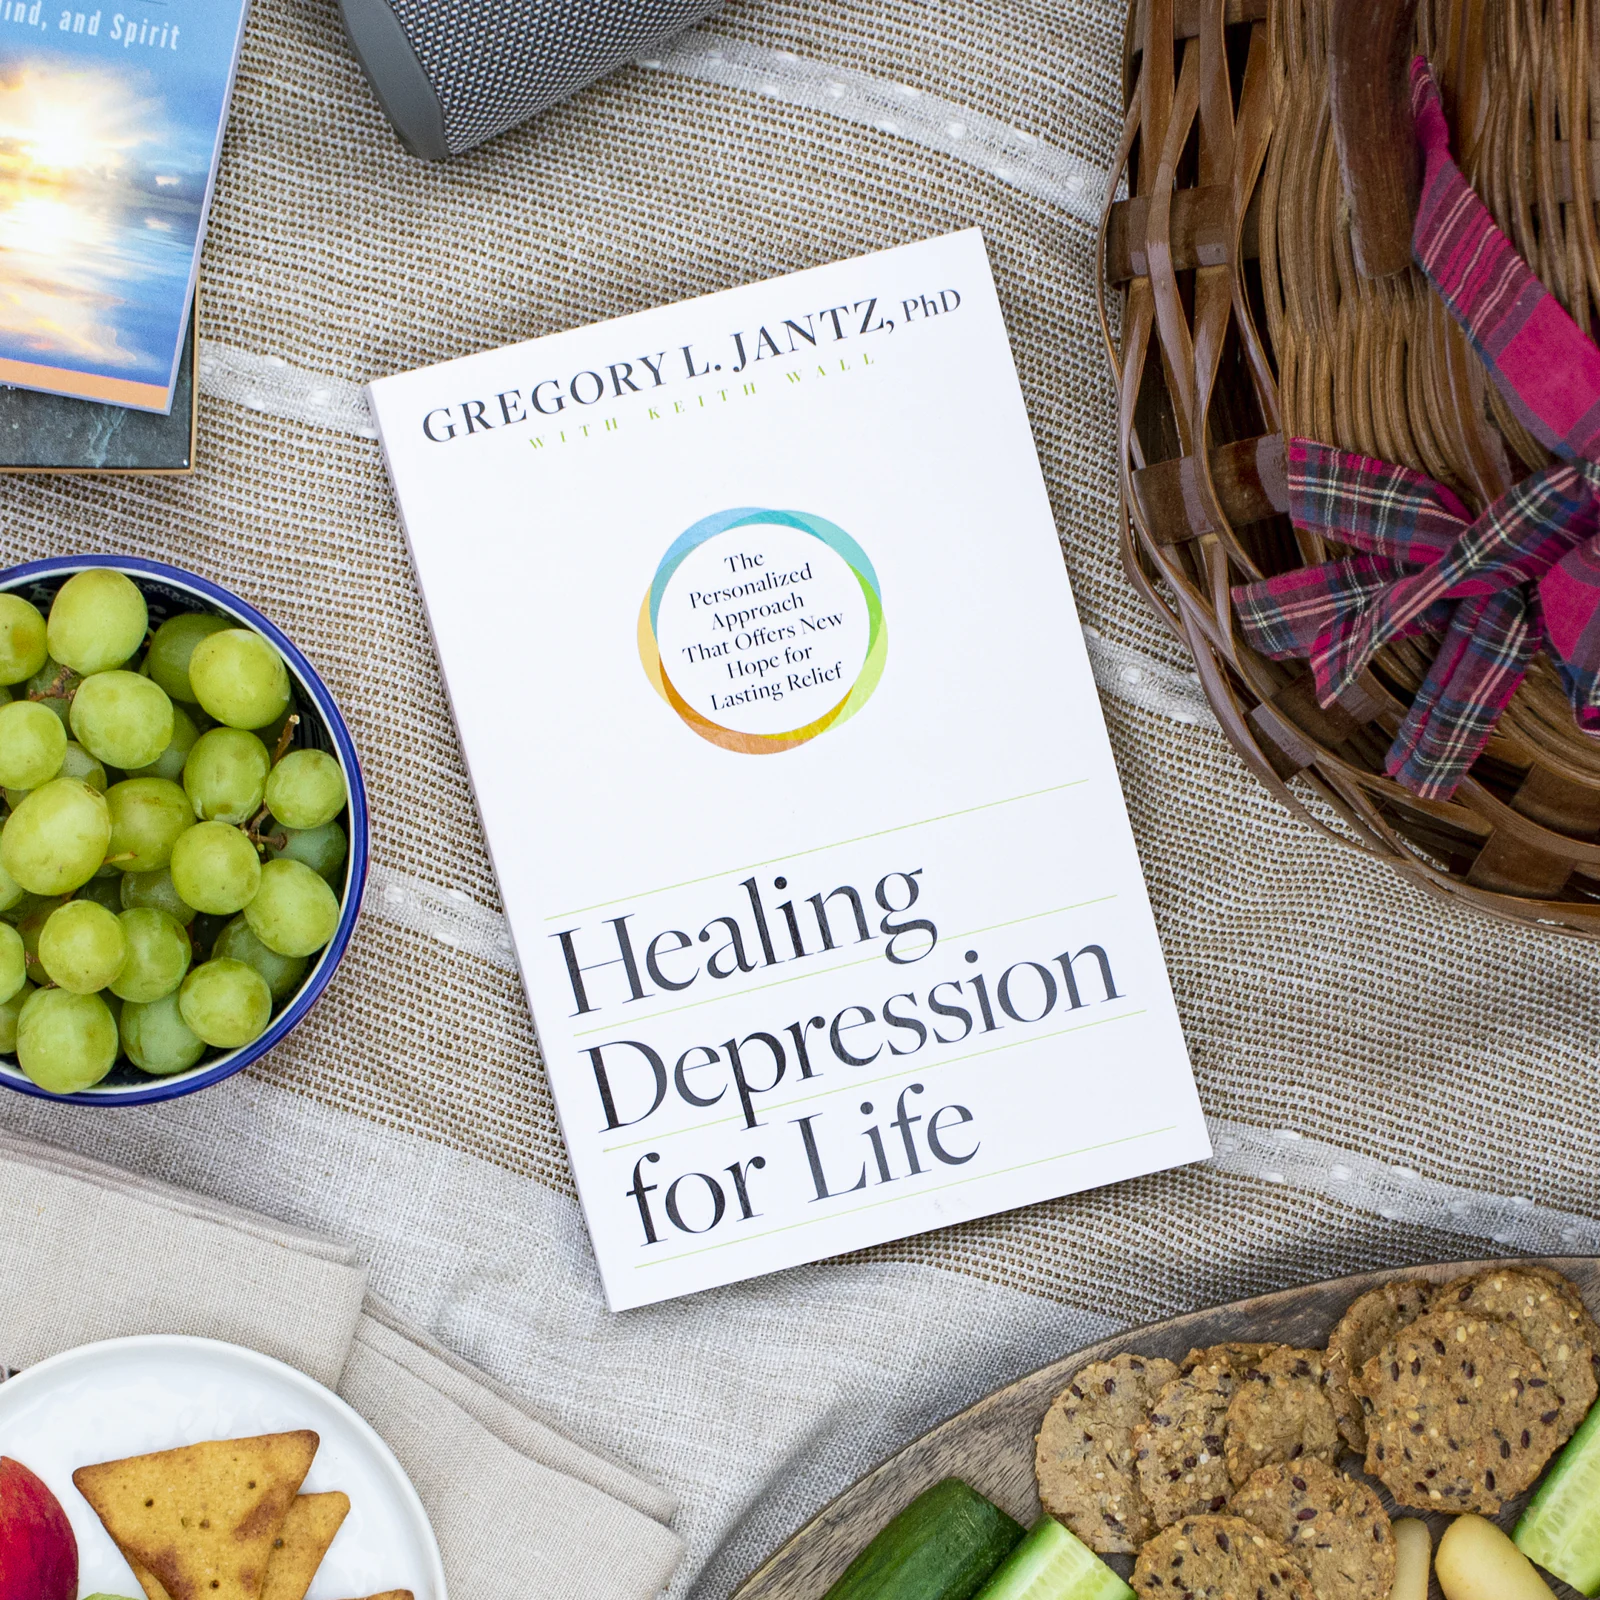 Healing Depression for Life